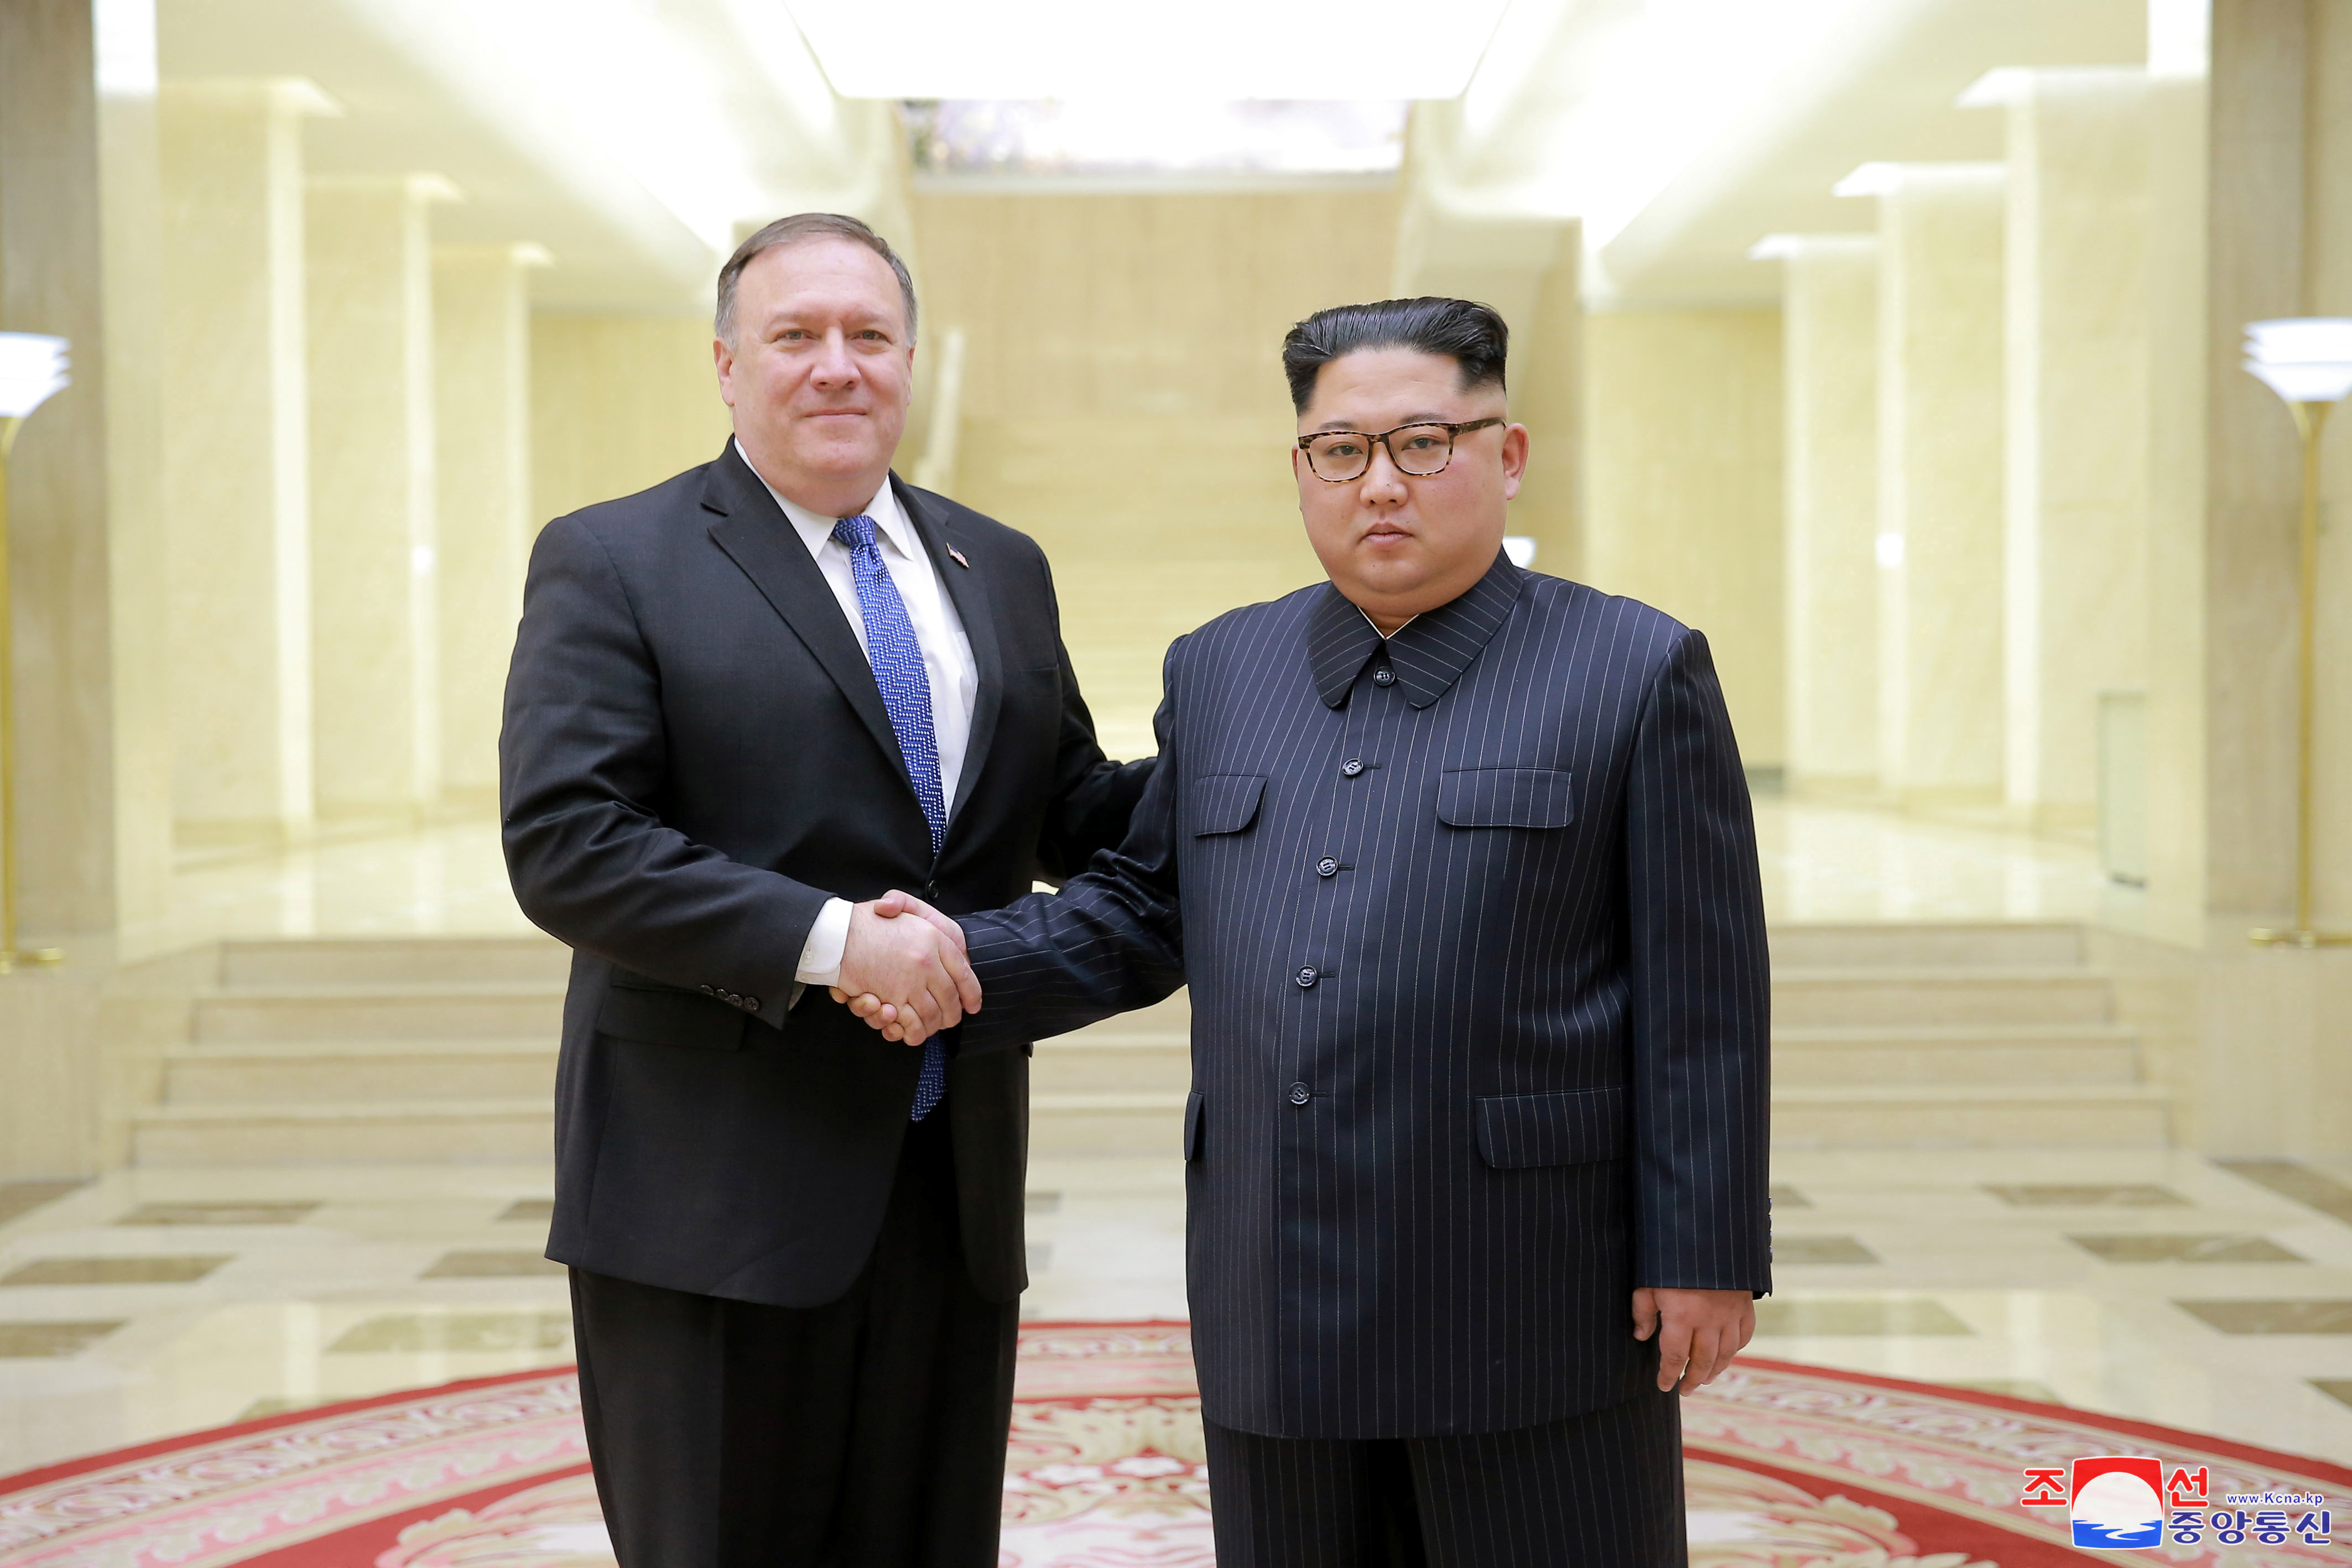 North Korean leader Kim Jong Un shakes hands with U.S. Secretary of State Mike Pompeo in this undated photo released on May 9, 2018 by North Korea's Korean Central News Agency (KCNA) in Pyongyang. (KCNA/Reuters)